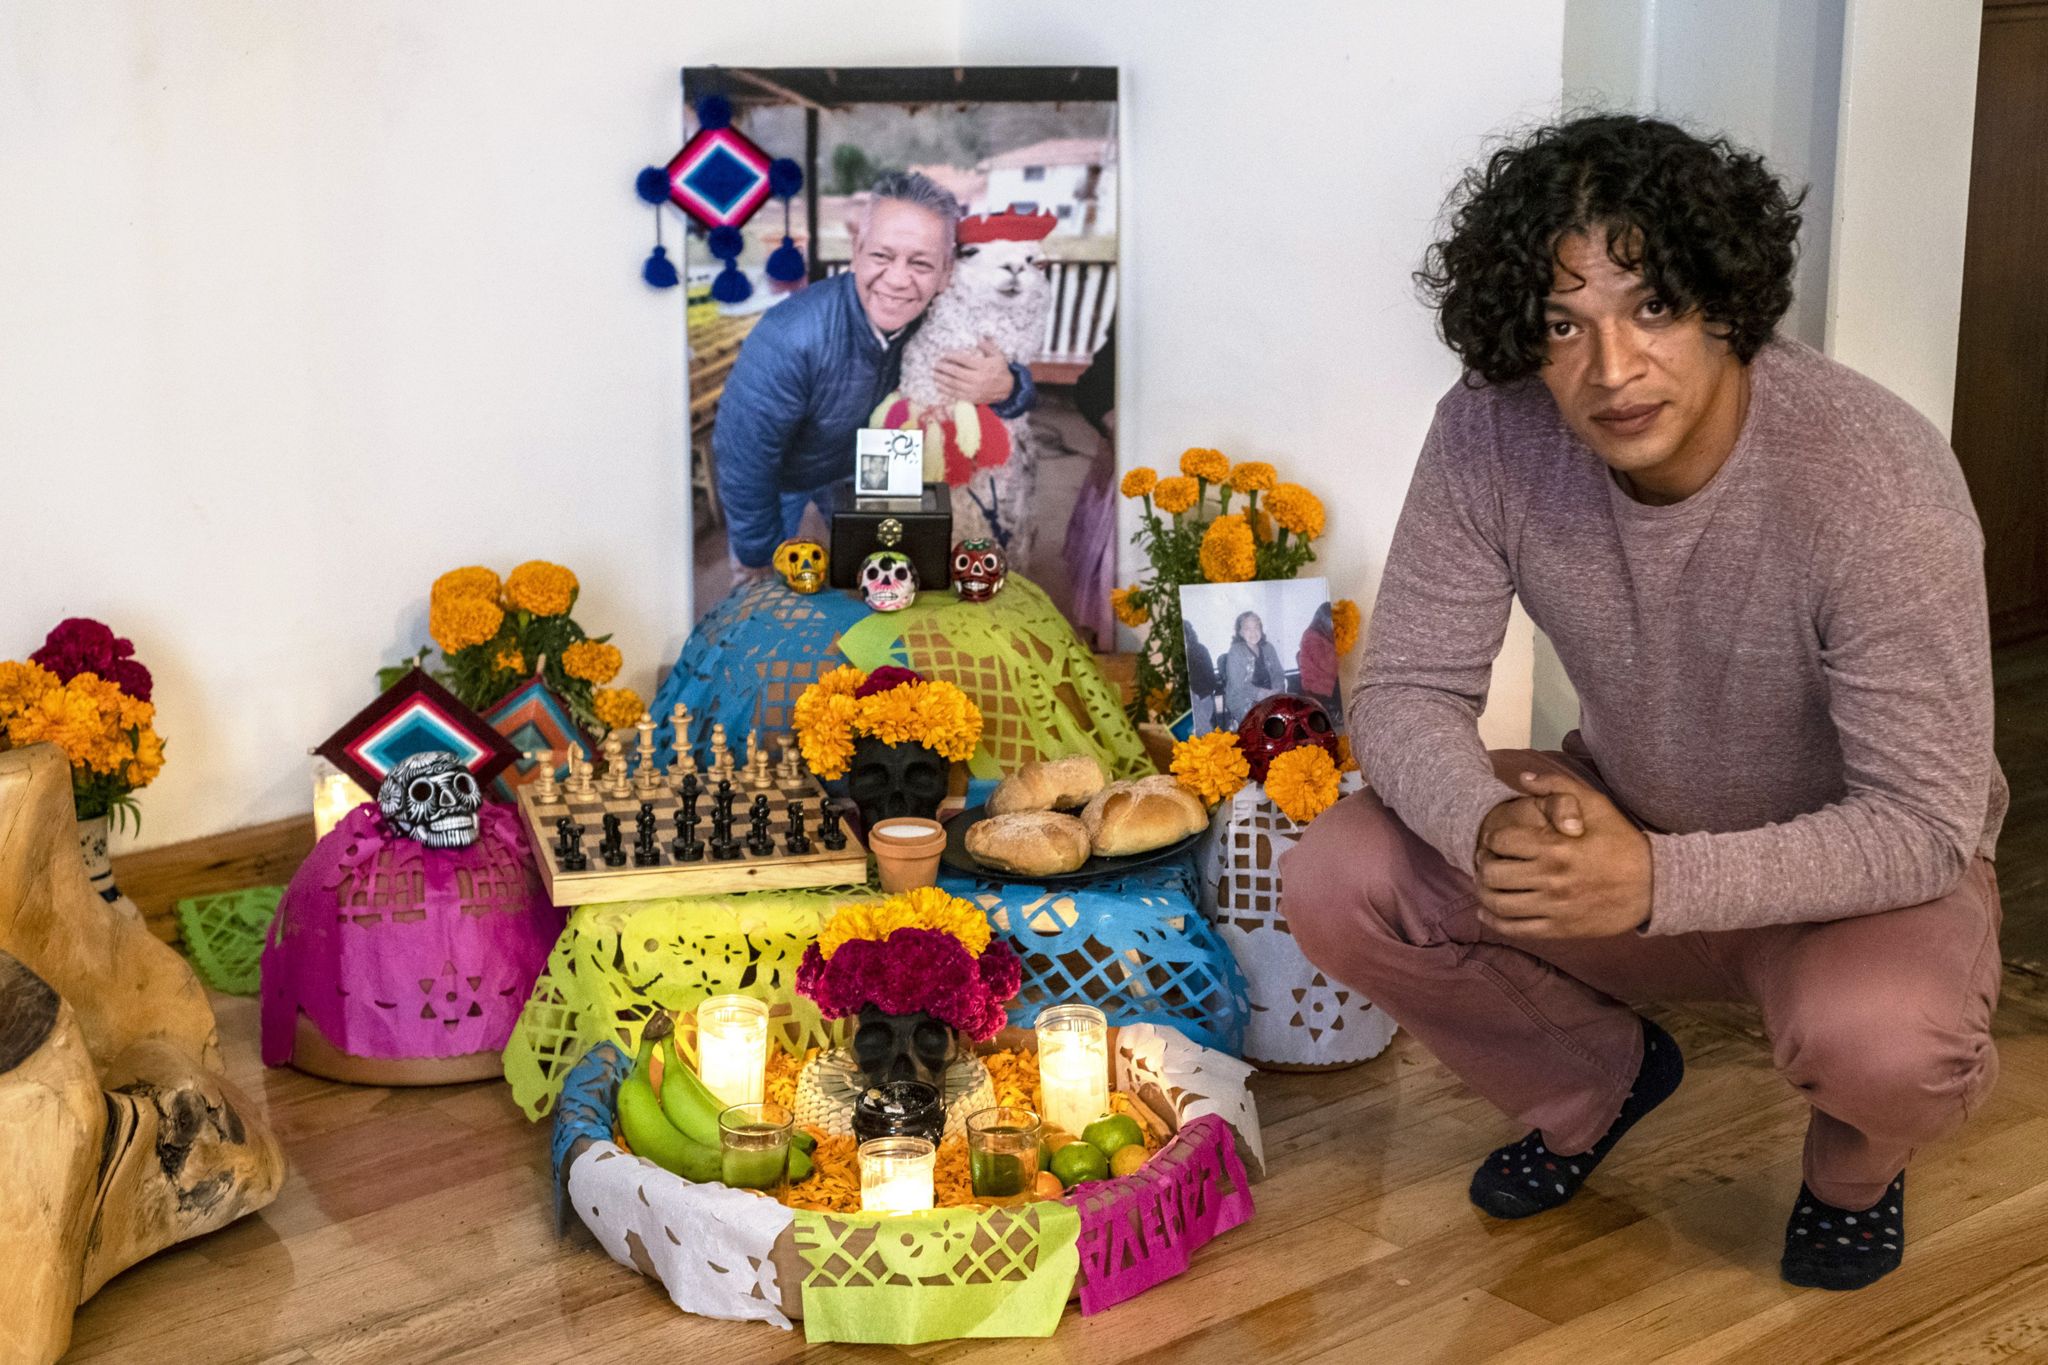 Luis Salas has made an altar in honour of his father Jose Javier Alfredo Salas Aguilar, who died of COVID in August